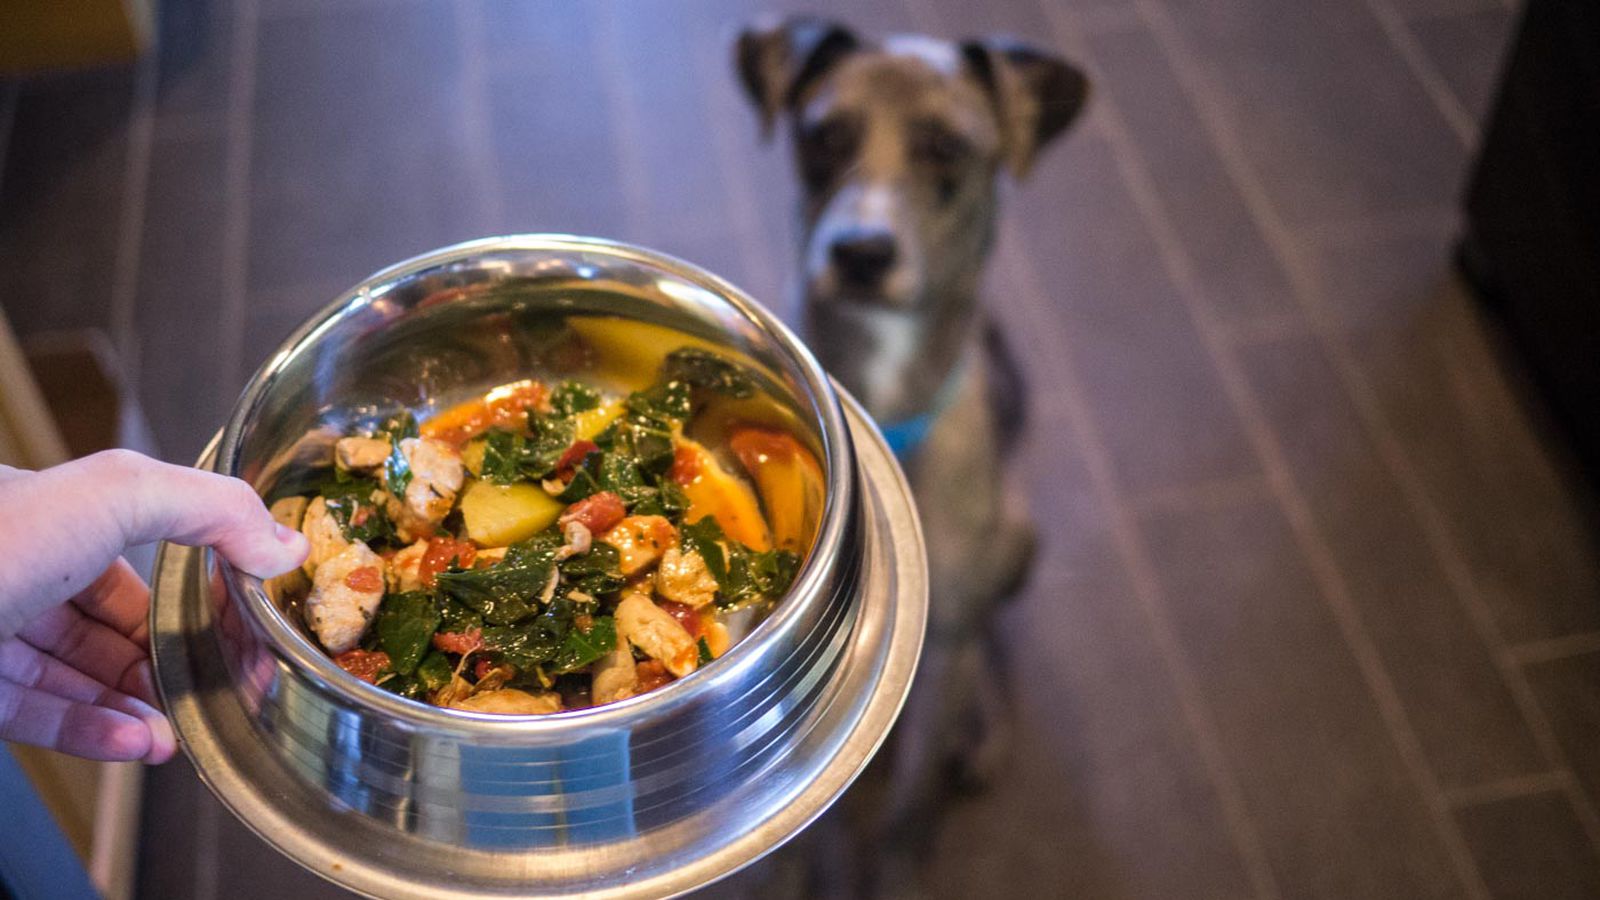 I Tried Cooking for My Dogs â Hereâs What I Learned